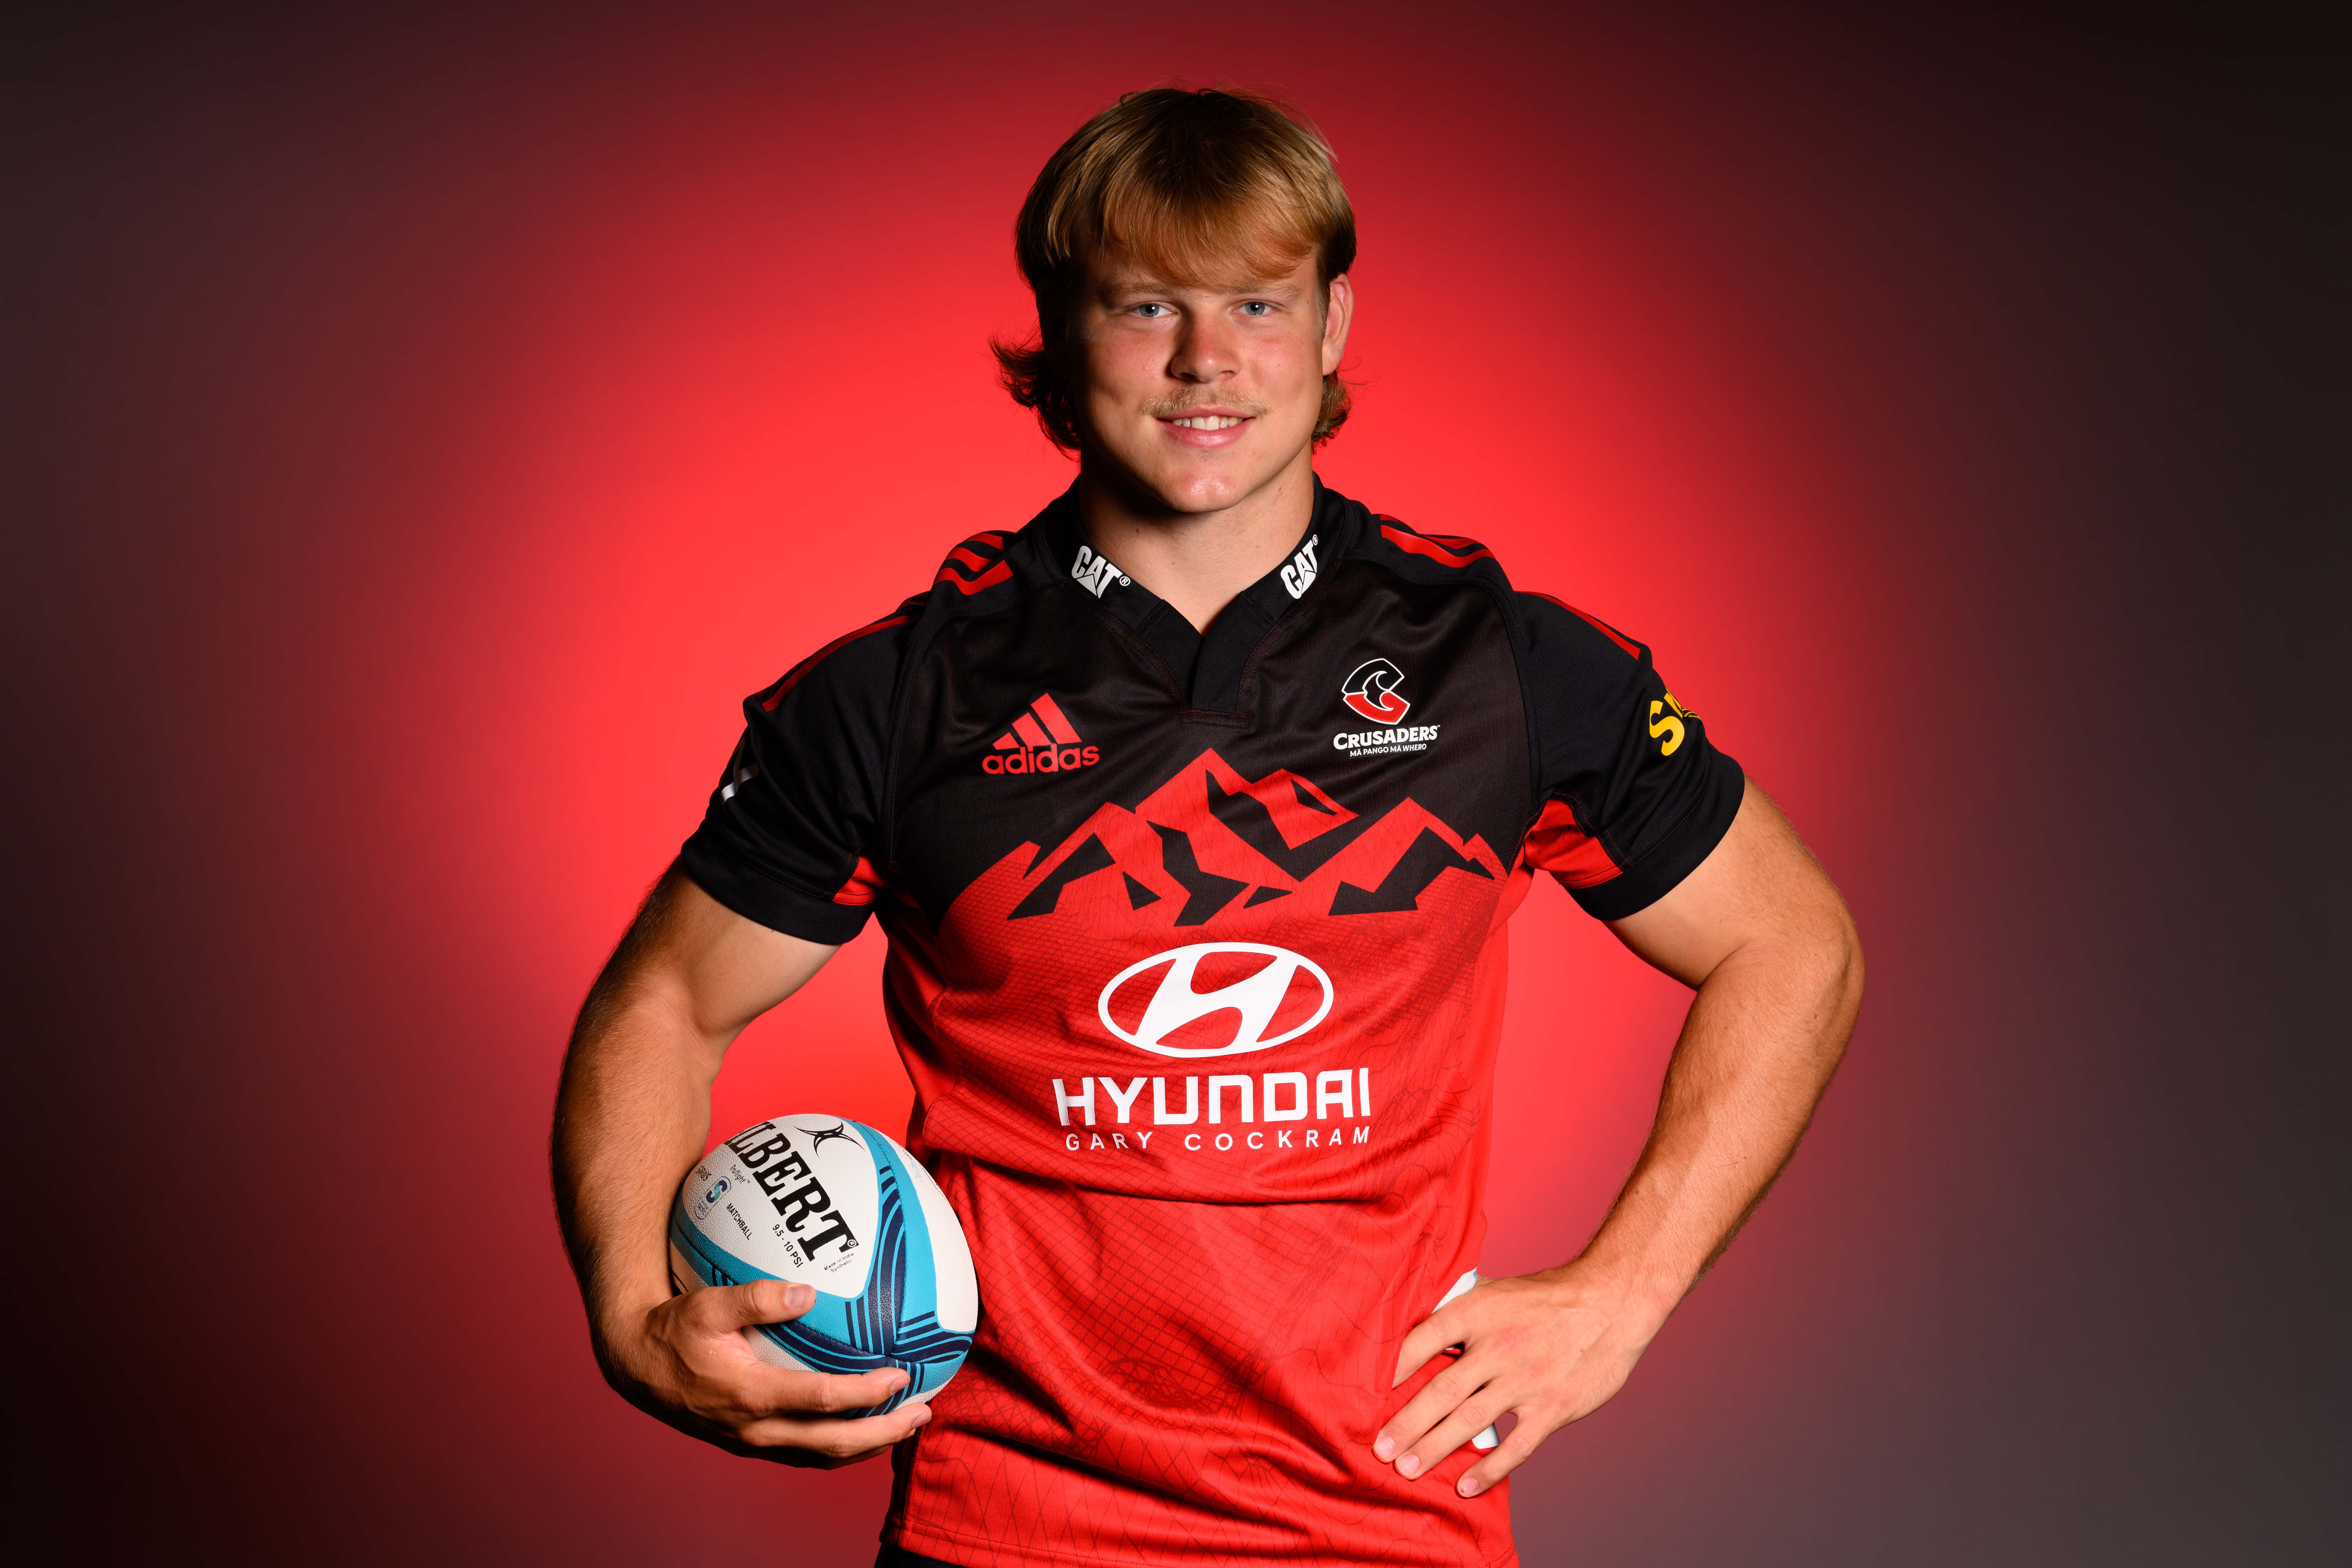 George Bell set to debut for the Crusaders in Perth